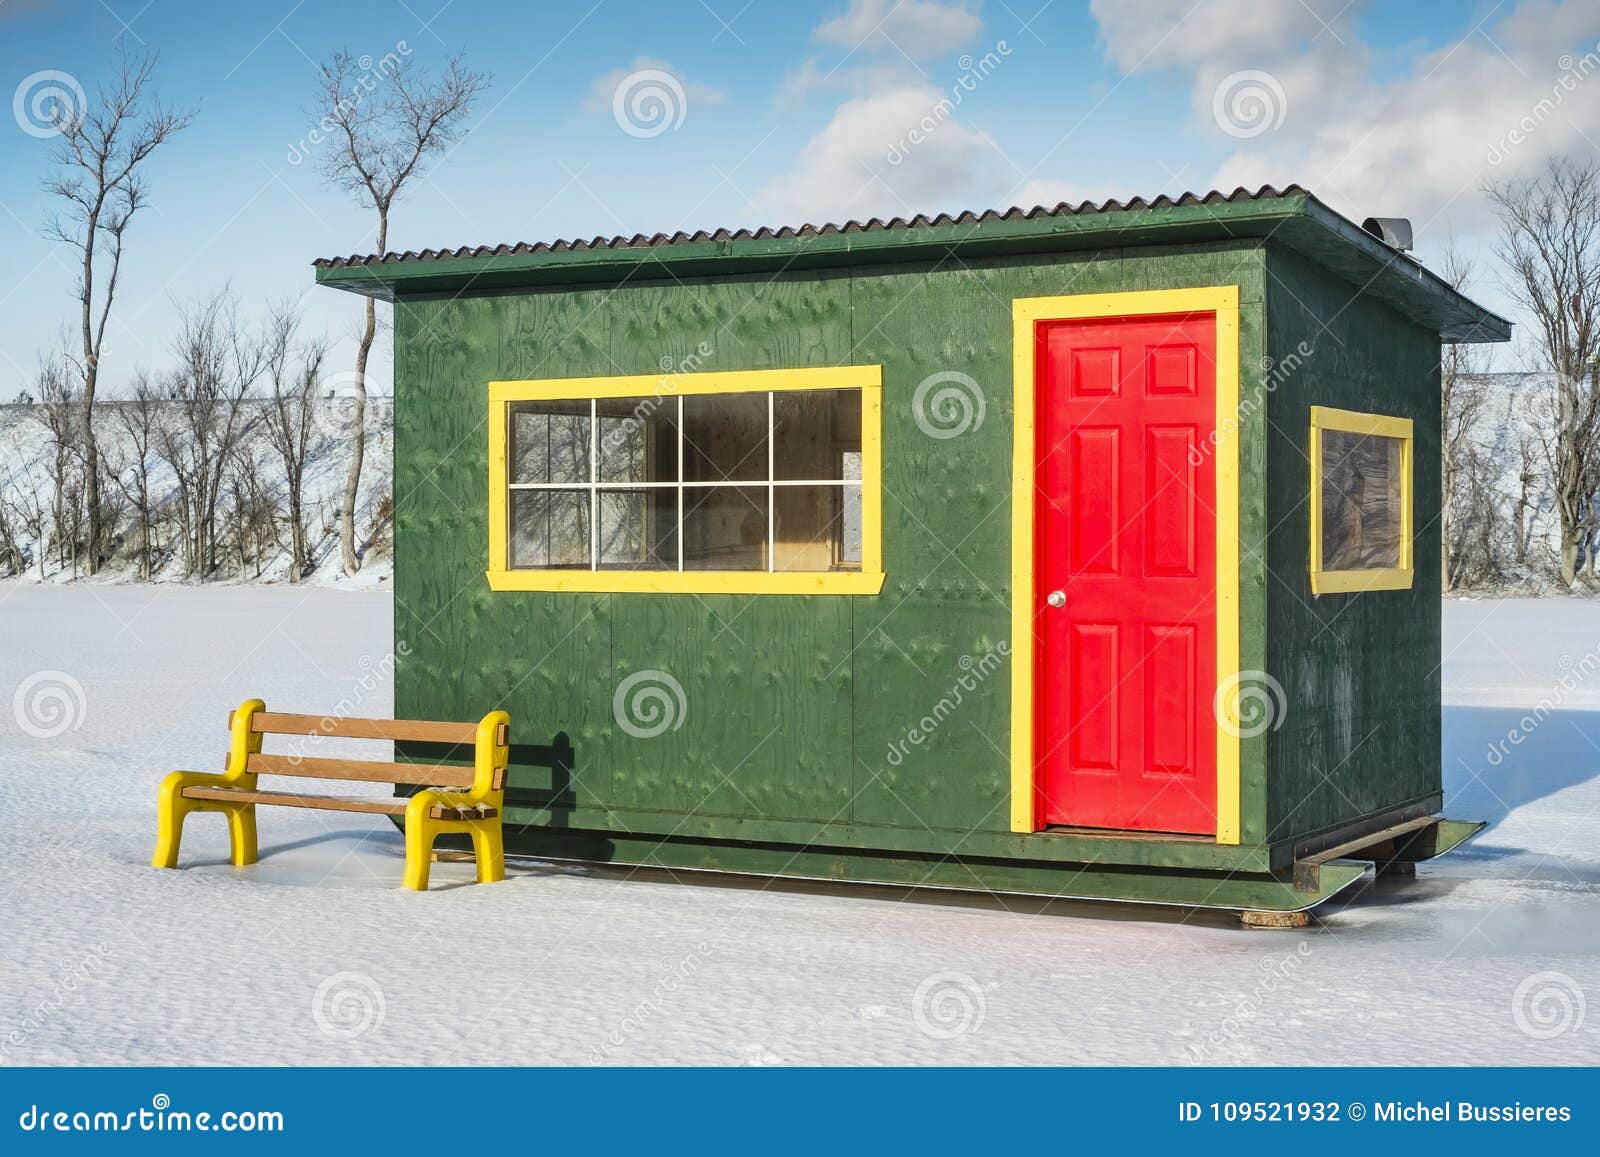 https://thumbs.dreamstime.com/z/green-yellow-red-ice-fishing-cabin-ice-fishing-cabins-bench-vast-spaces-frozen-rivi%C3%A8re-des-mille-%C3%AEles-ste-109521932.jpg